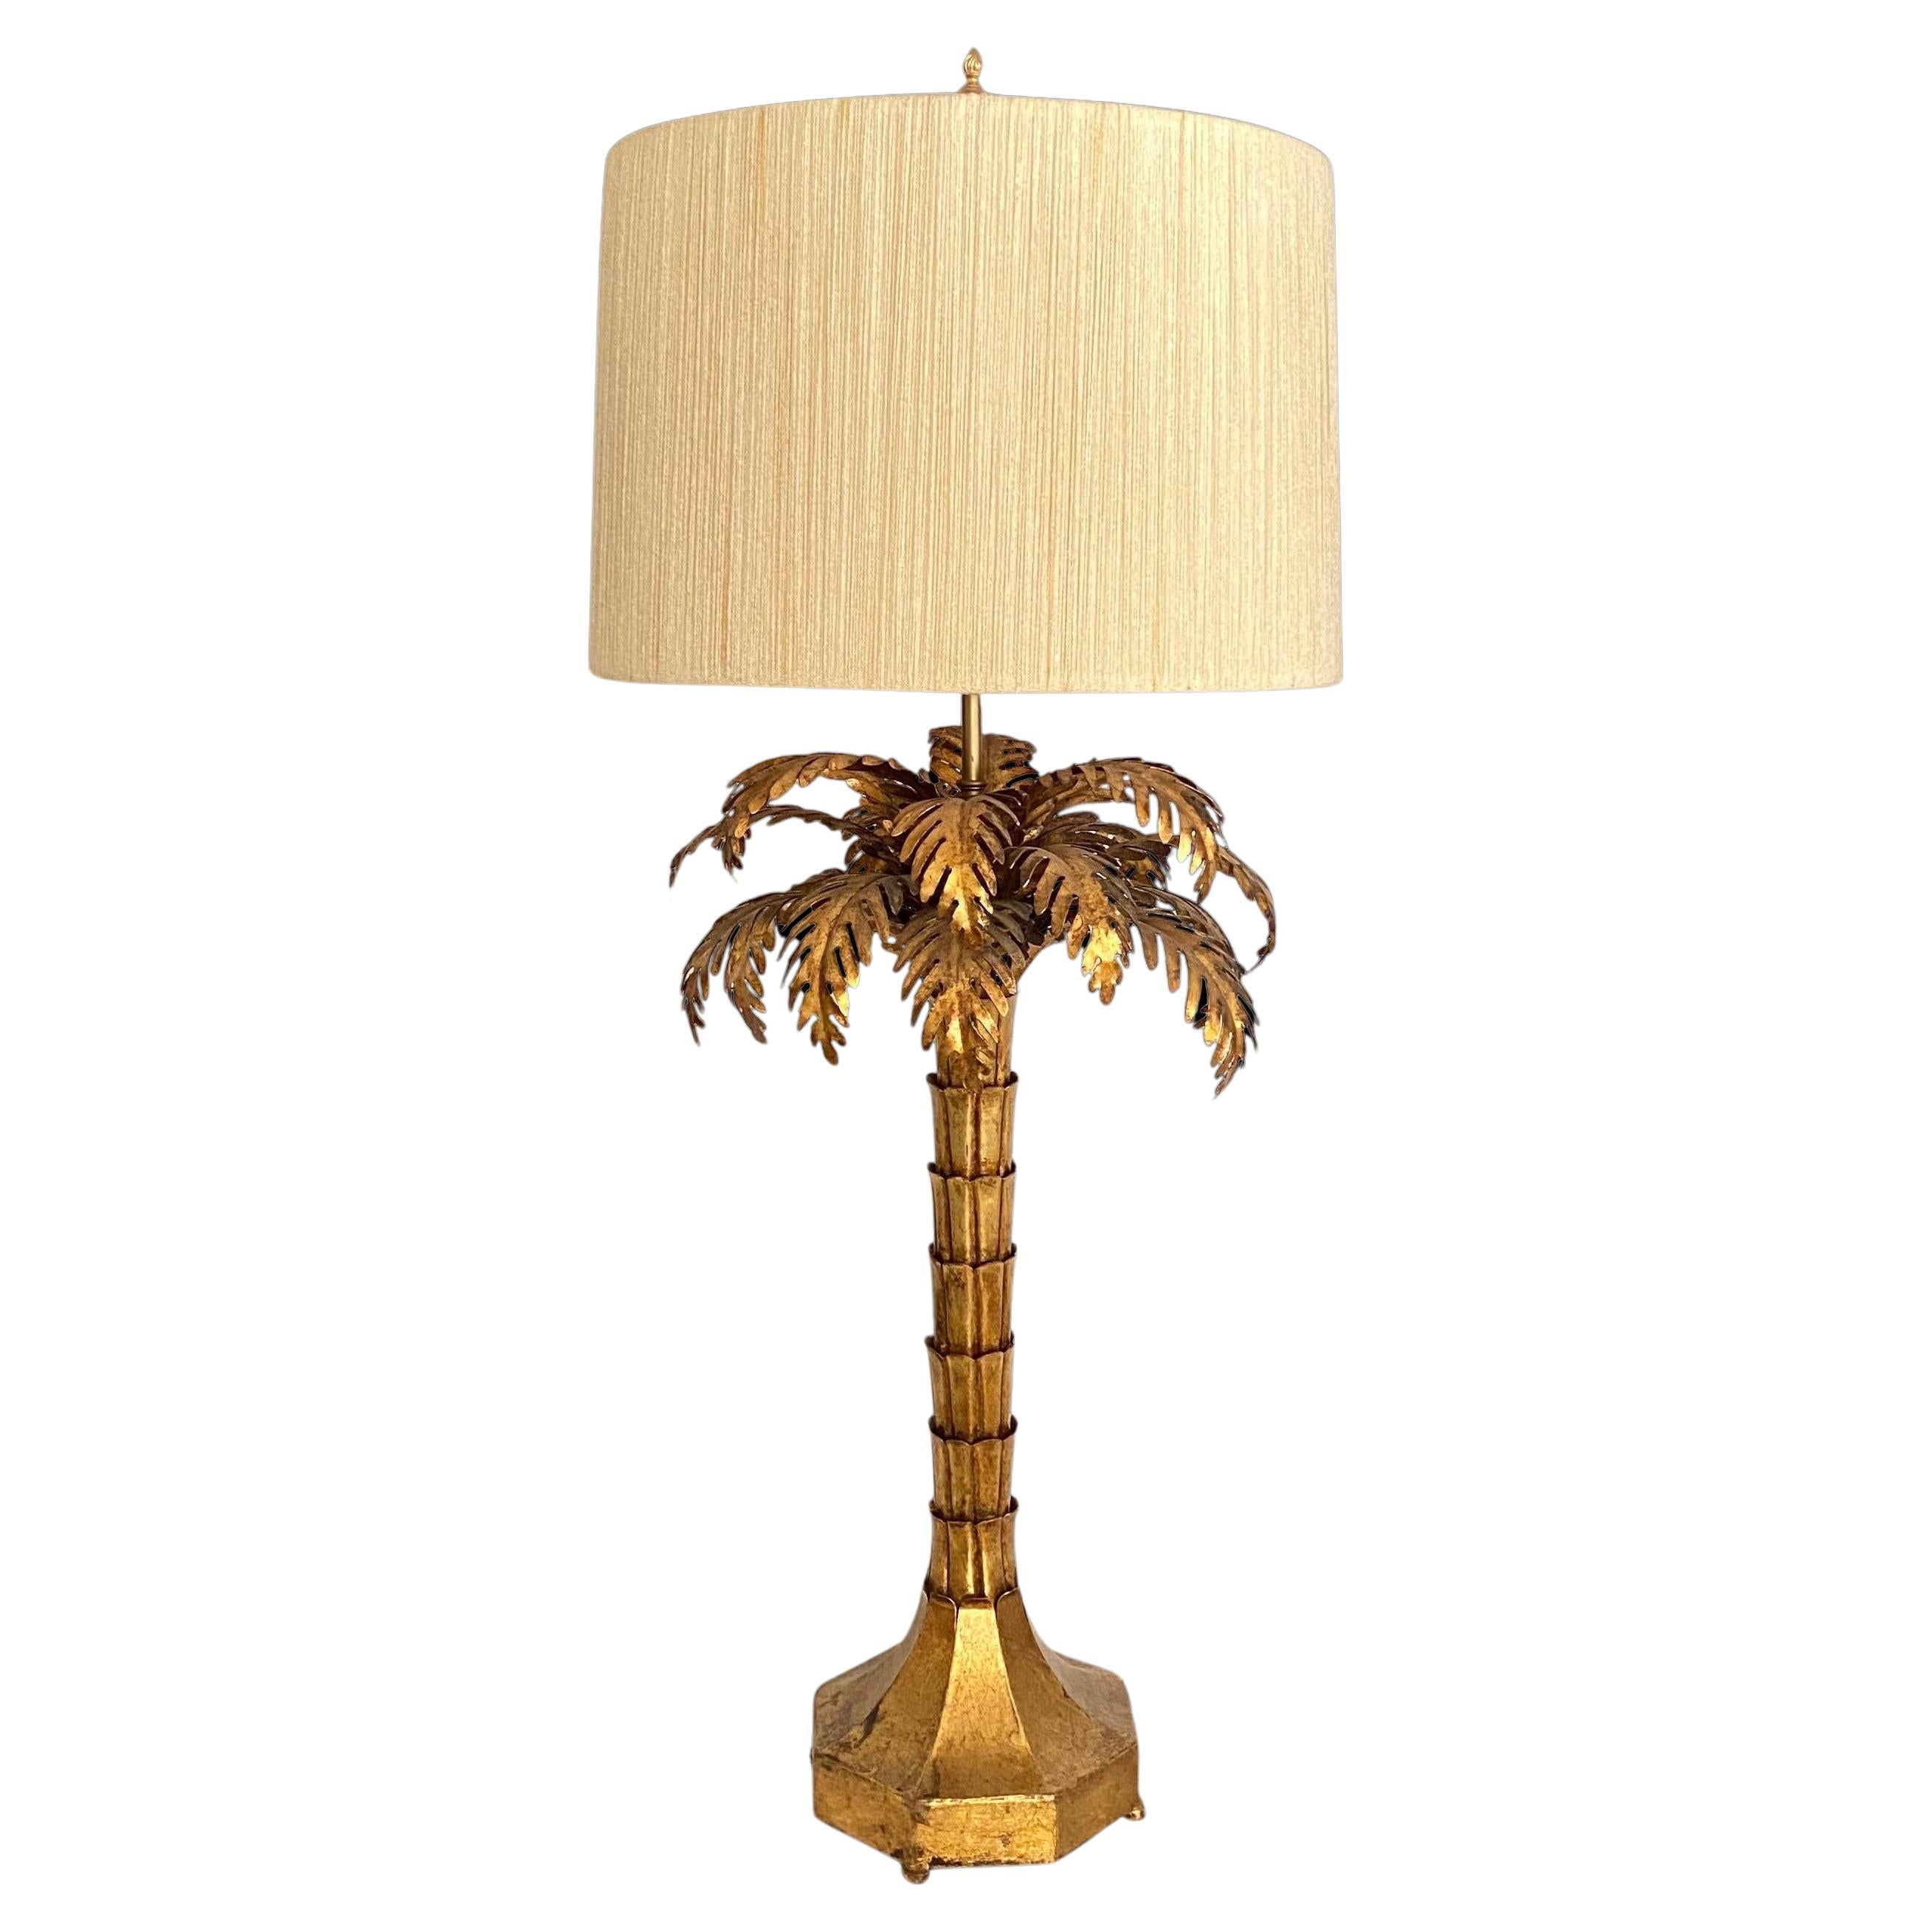 Warren Kessler Gilded Palm Tree Table Lamp With String Shade